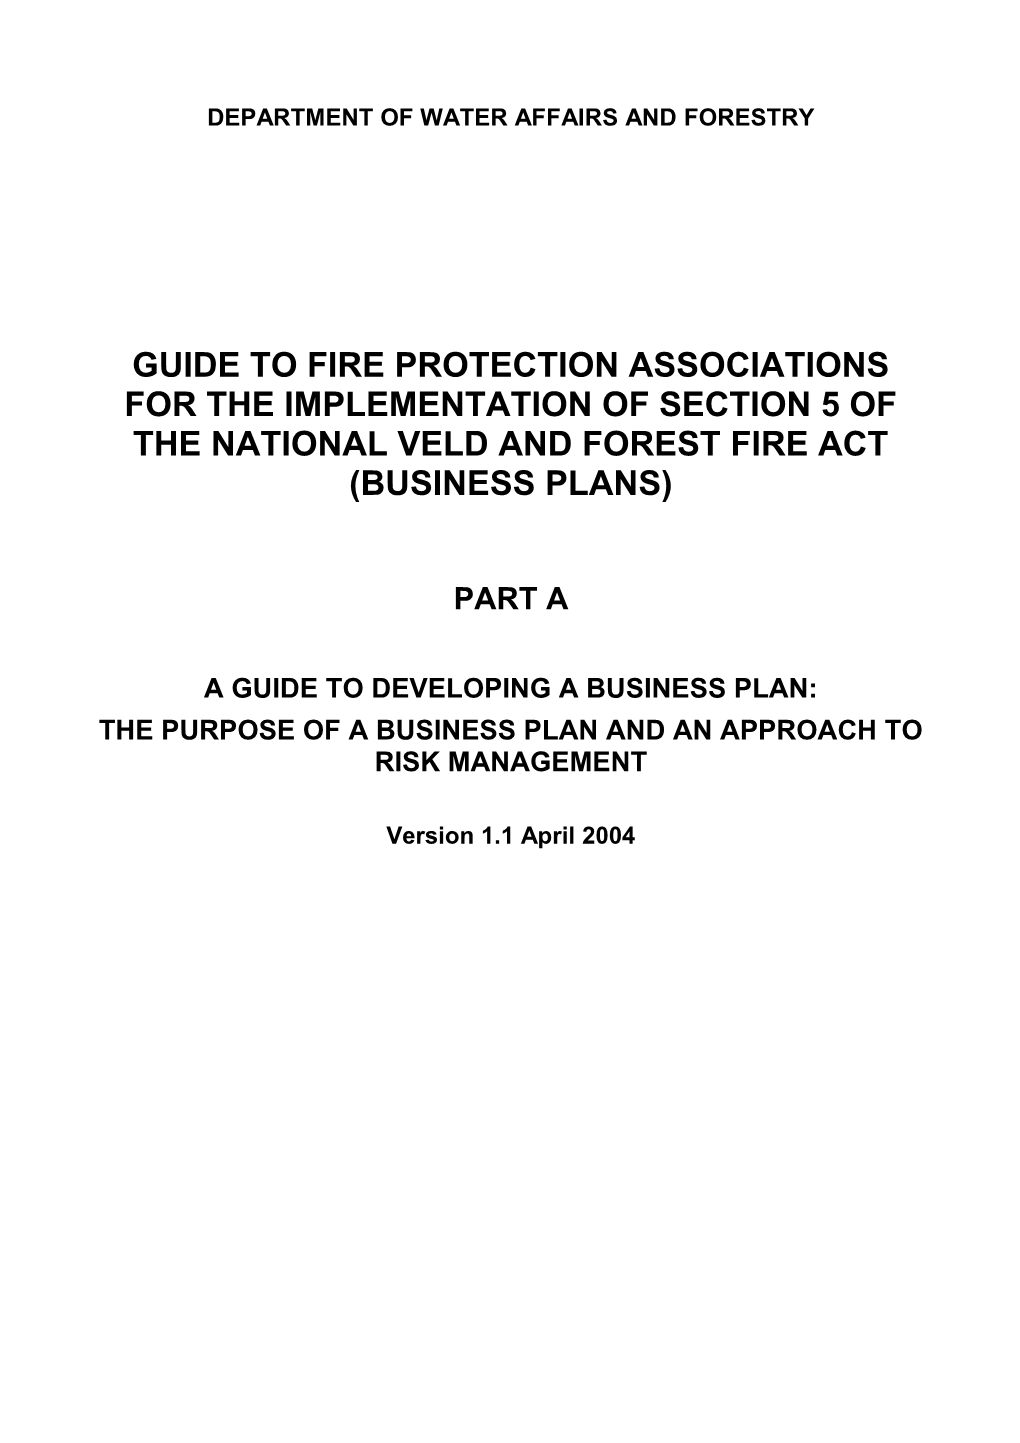 Suggested Amendments to Veld and Forest Fire Act